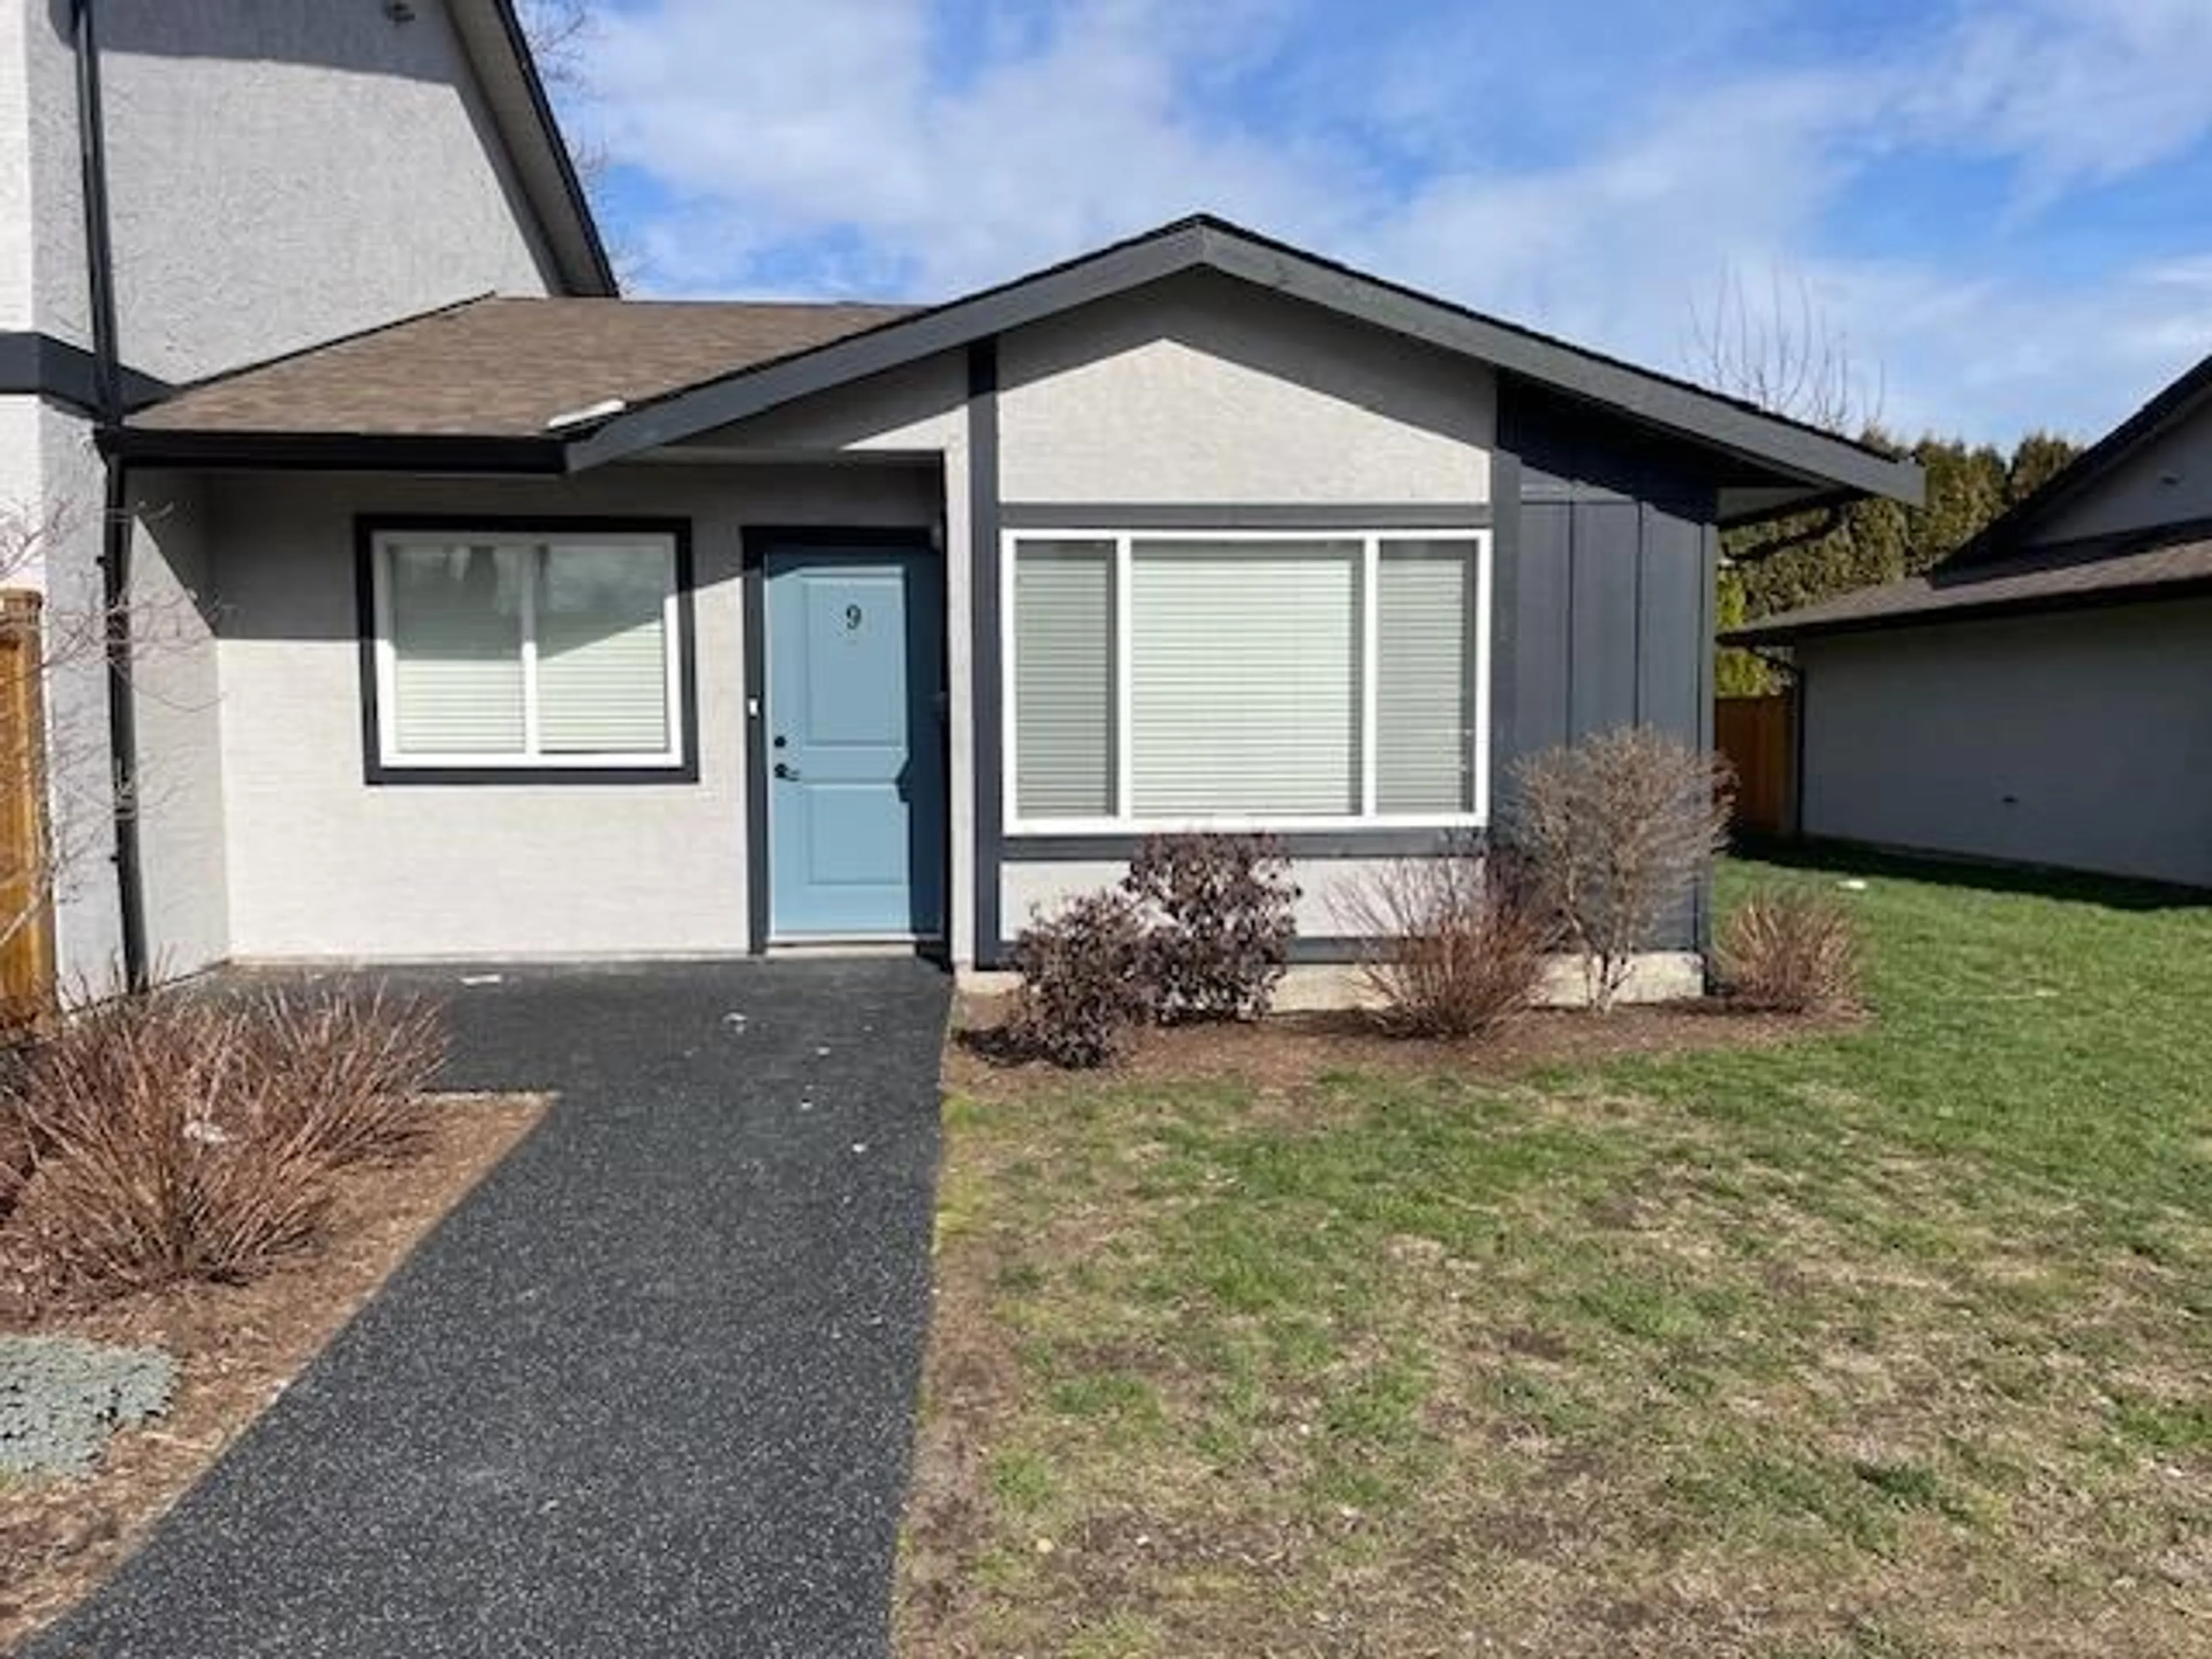 Home with vinyl exterior material for 9 45927 LEWIS AVENUE, Chilliwack British Columbia V2P3C3